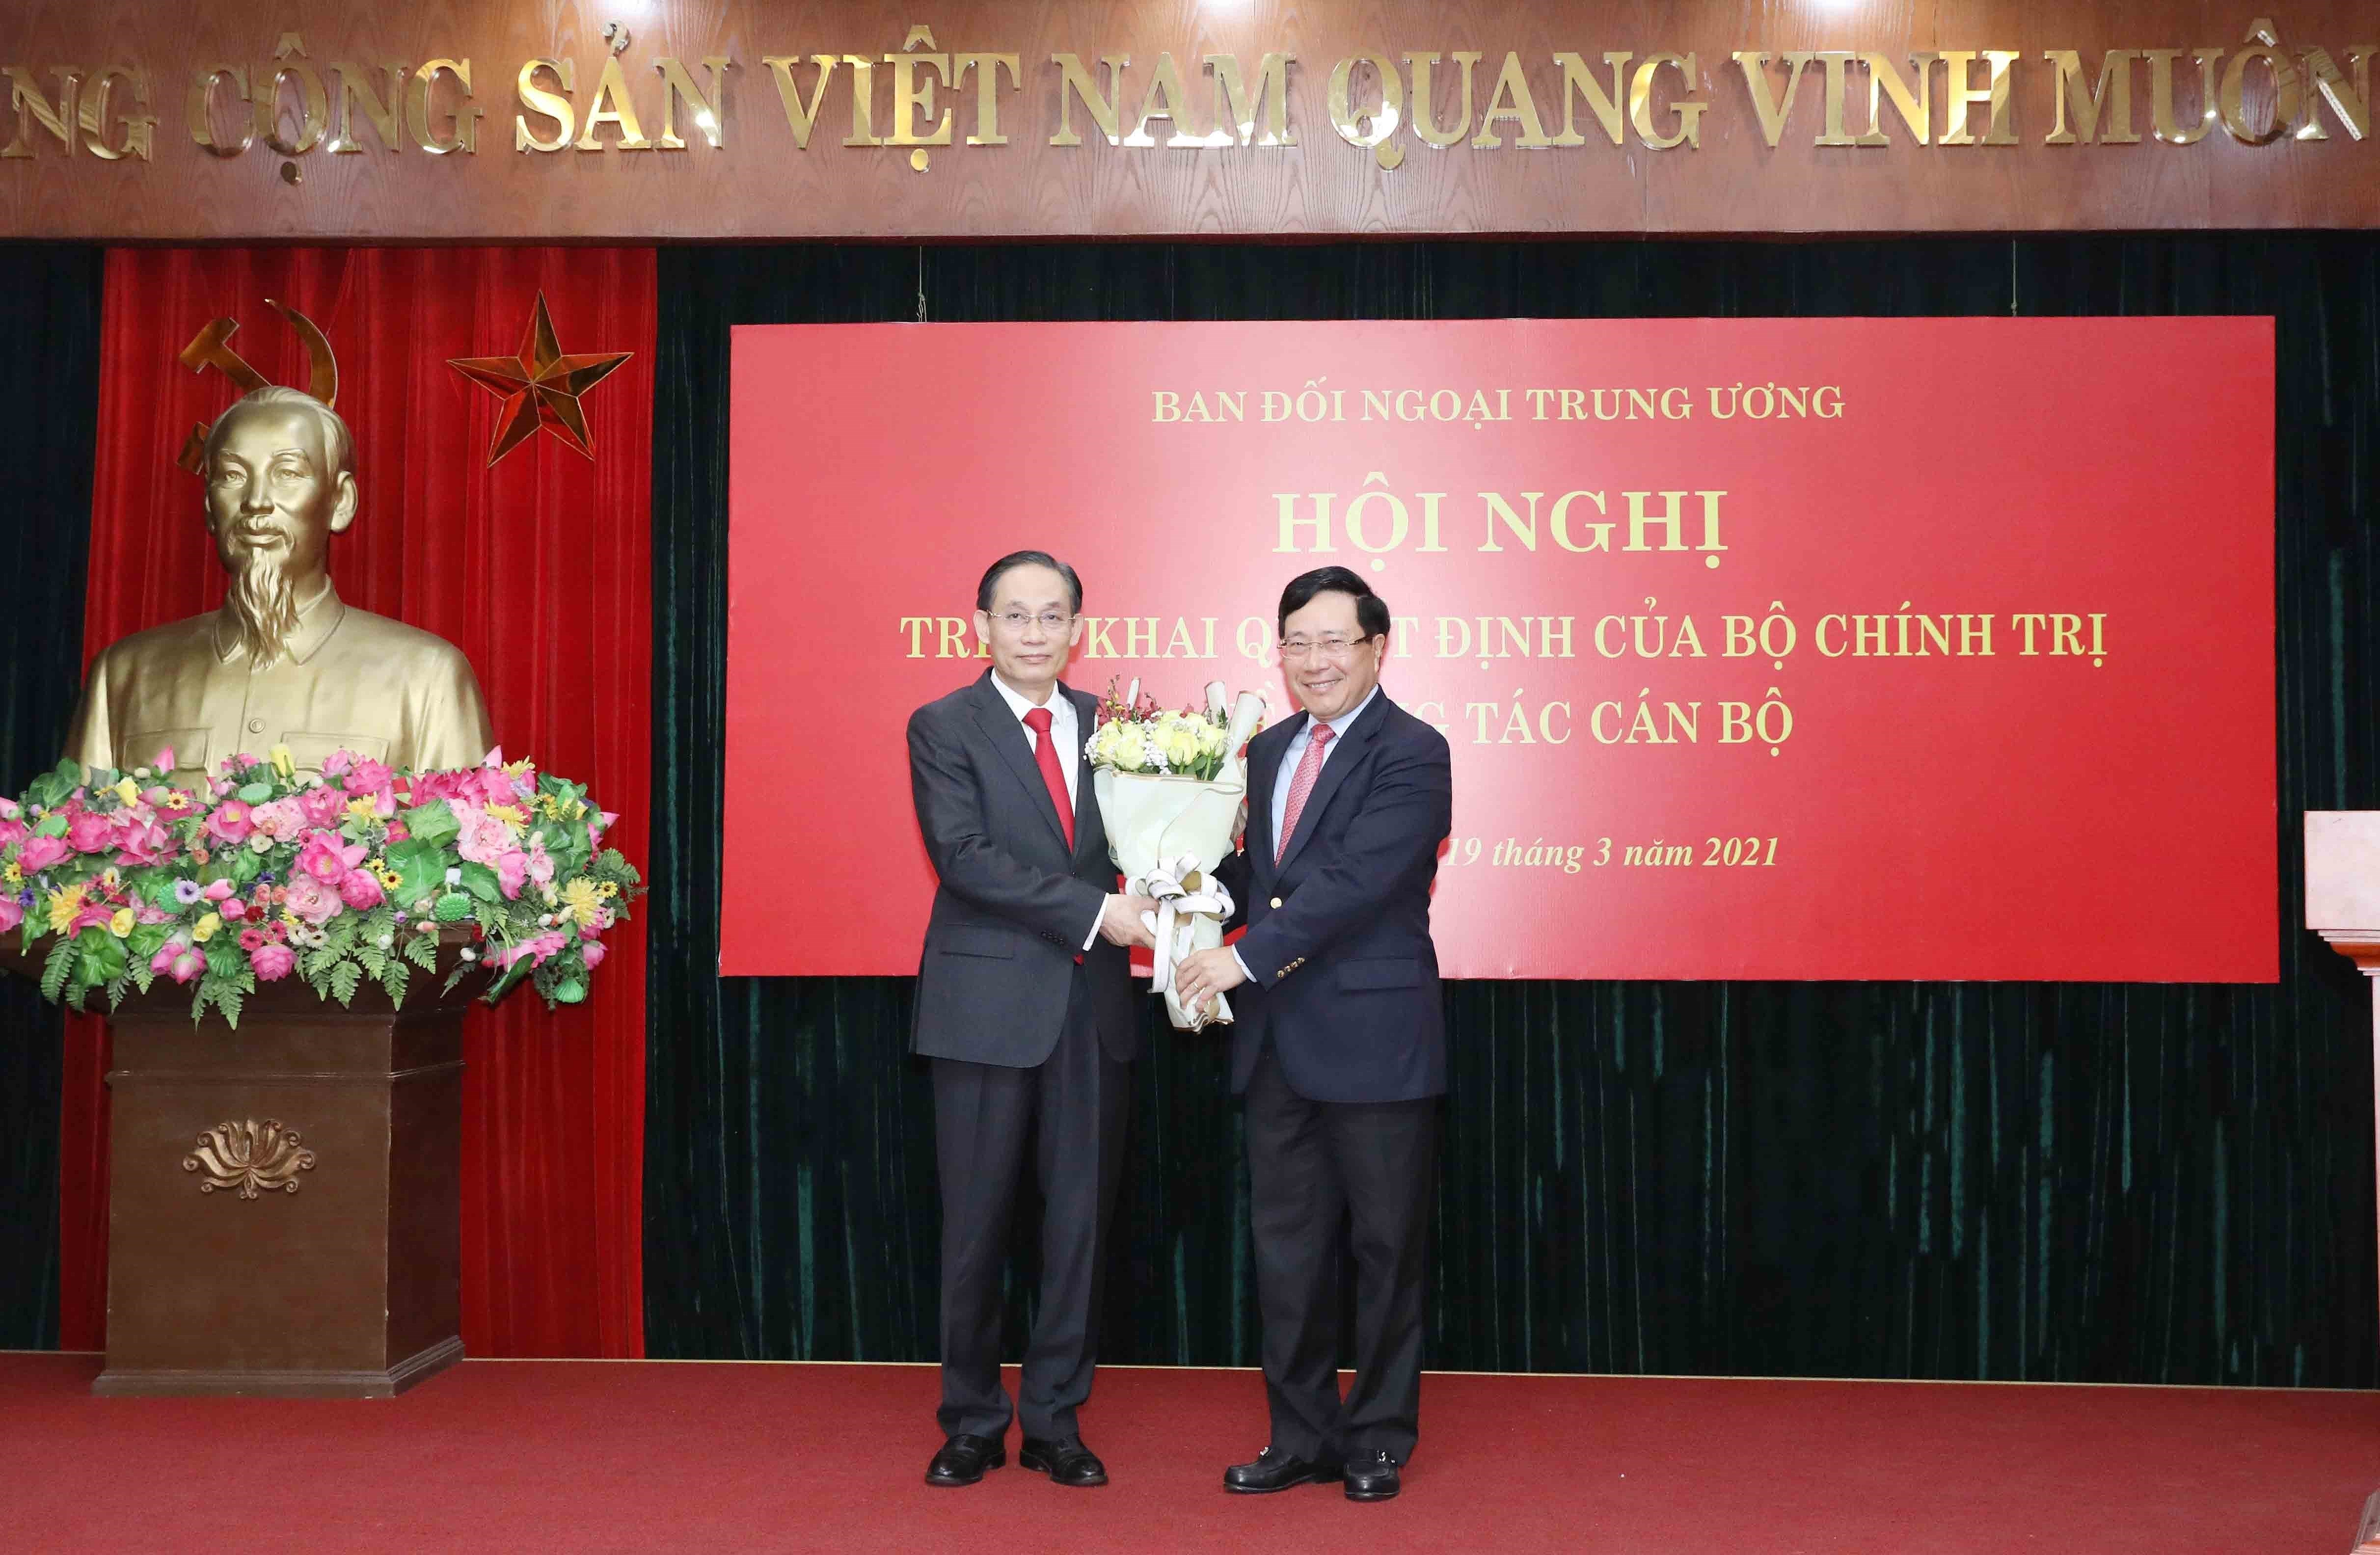 Le Hoai Trung appointed as head of Party’s Commission for External Relations hinh anh 1